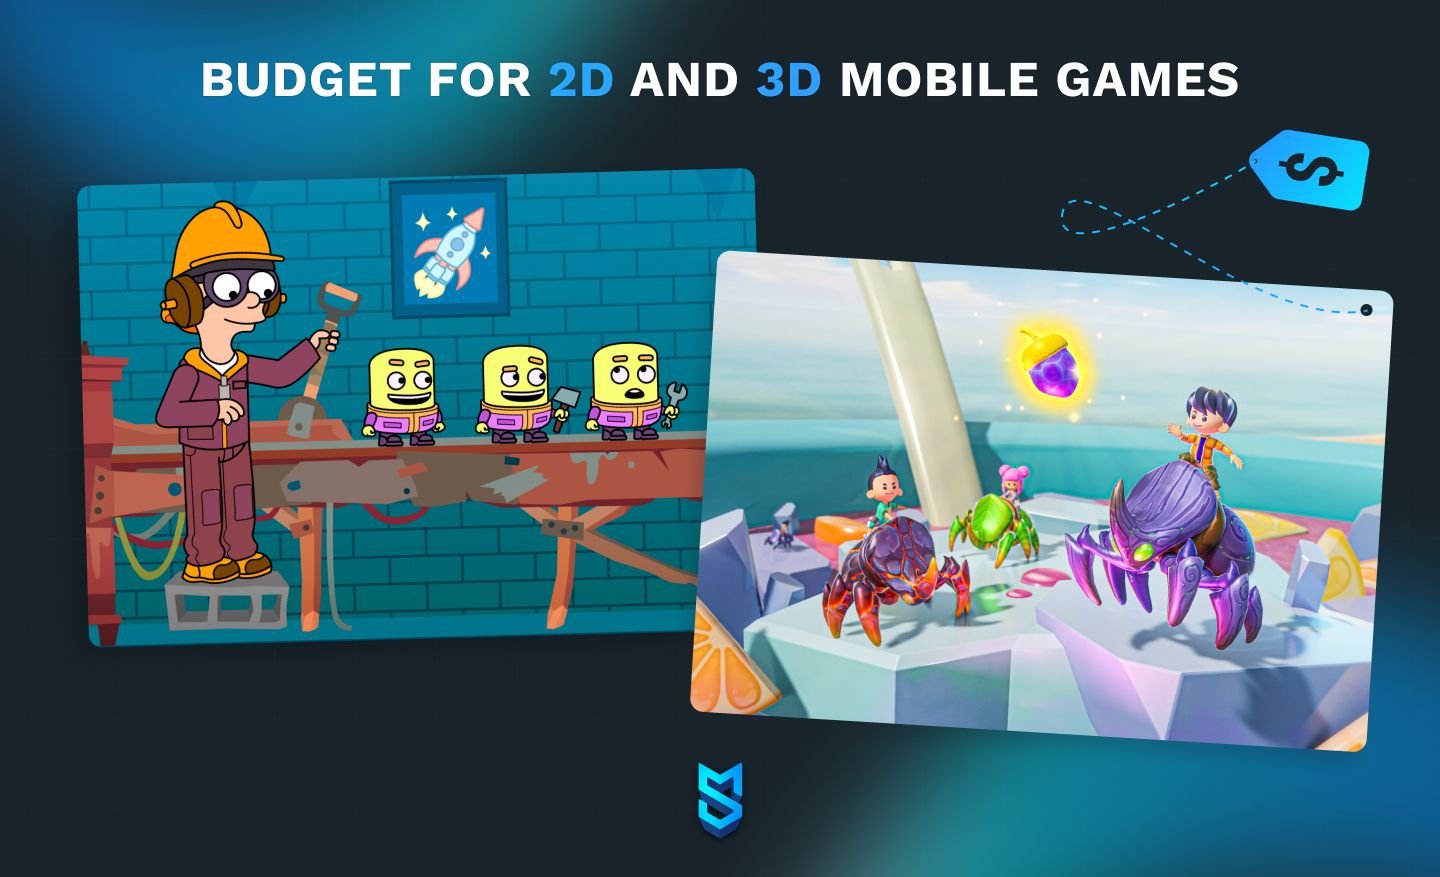 Budget for 2D and 3D mobile games